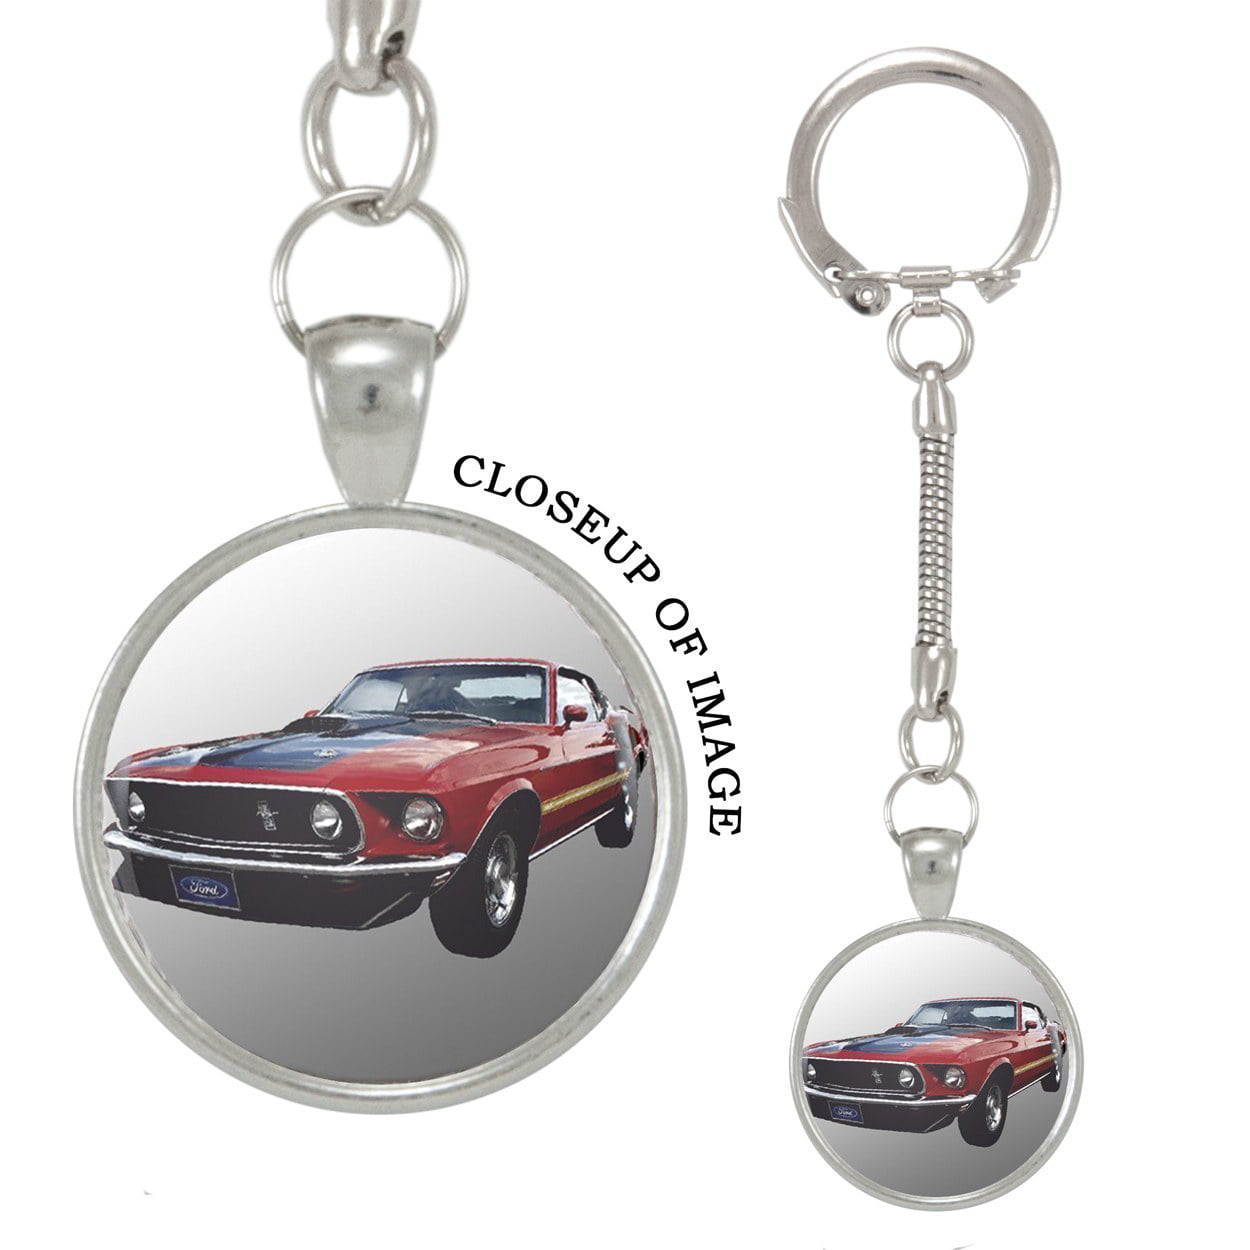 Personalized Keyring Birthday Gift 008 Car Keychain similar to 1969 Mustang MACH 1 MUSTANG Keychain Father's Day Gift Christmas Gift